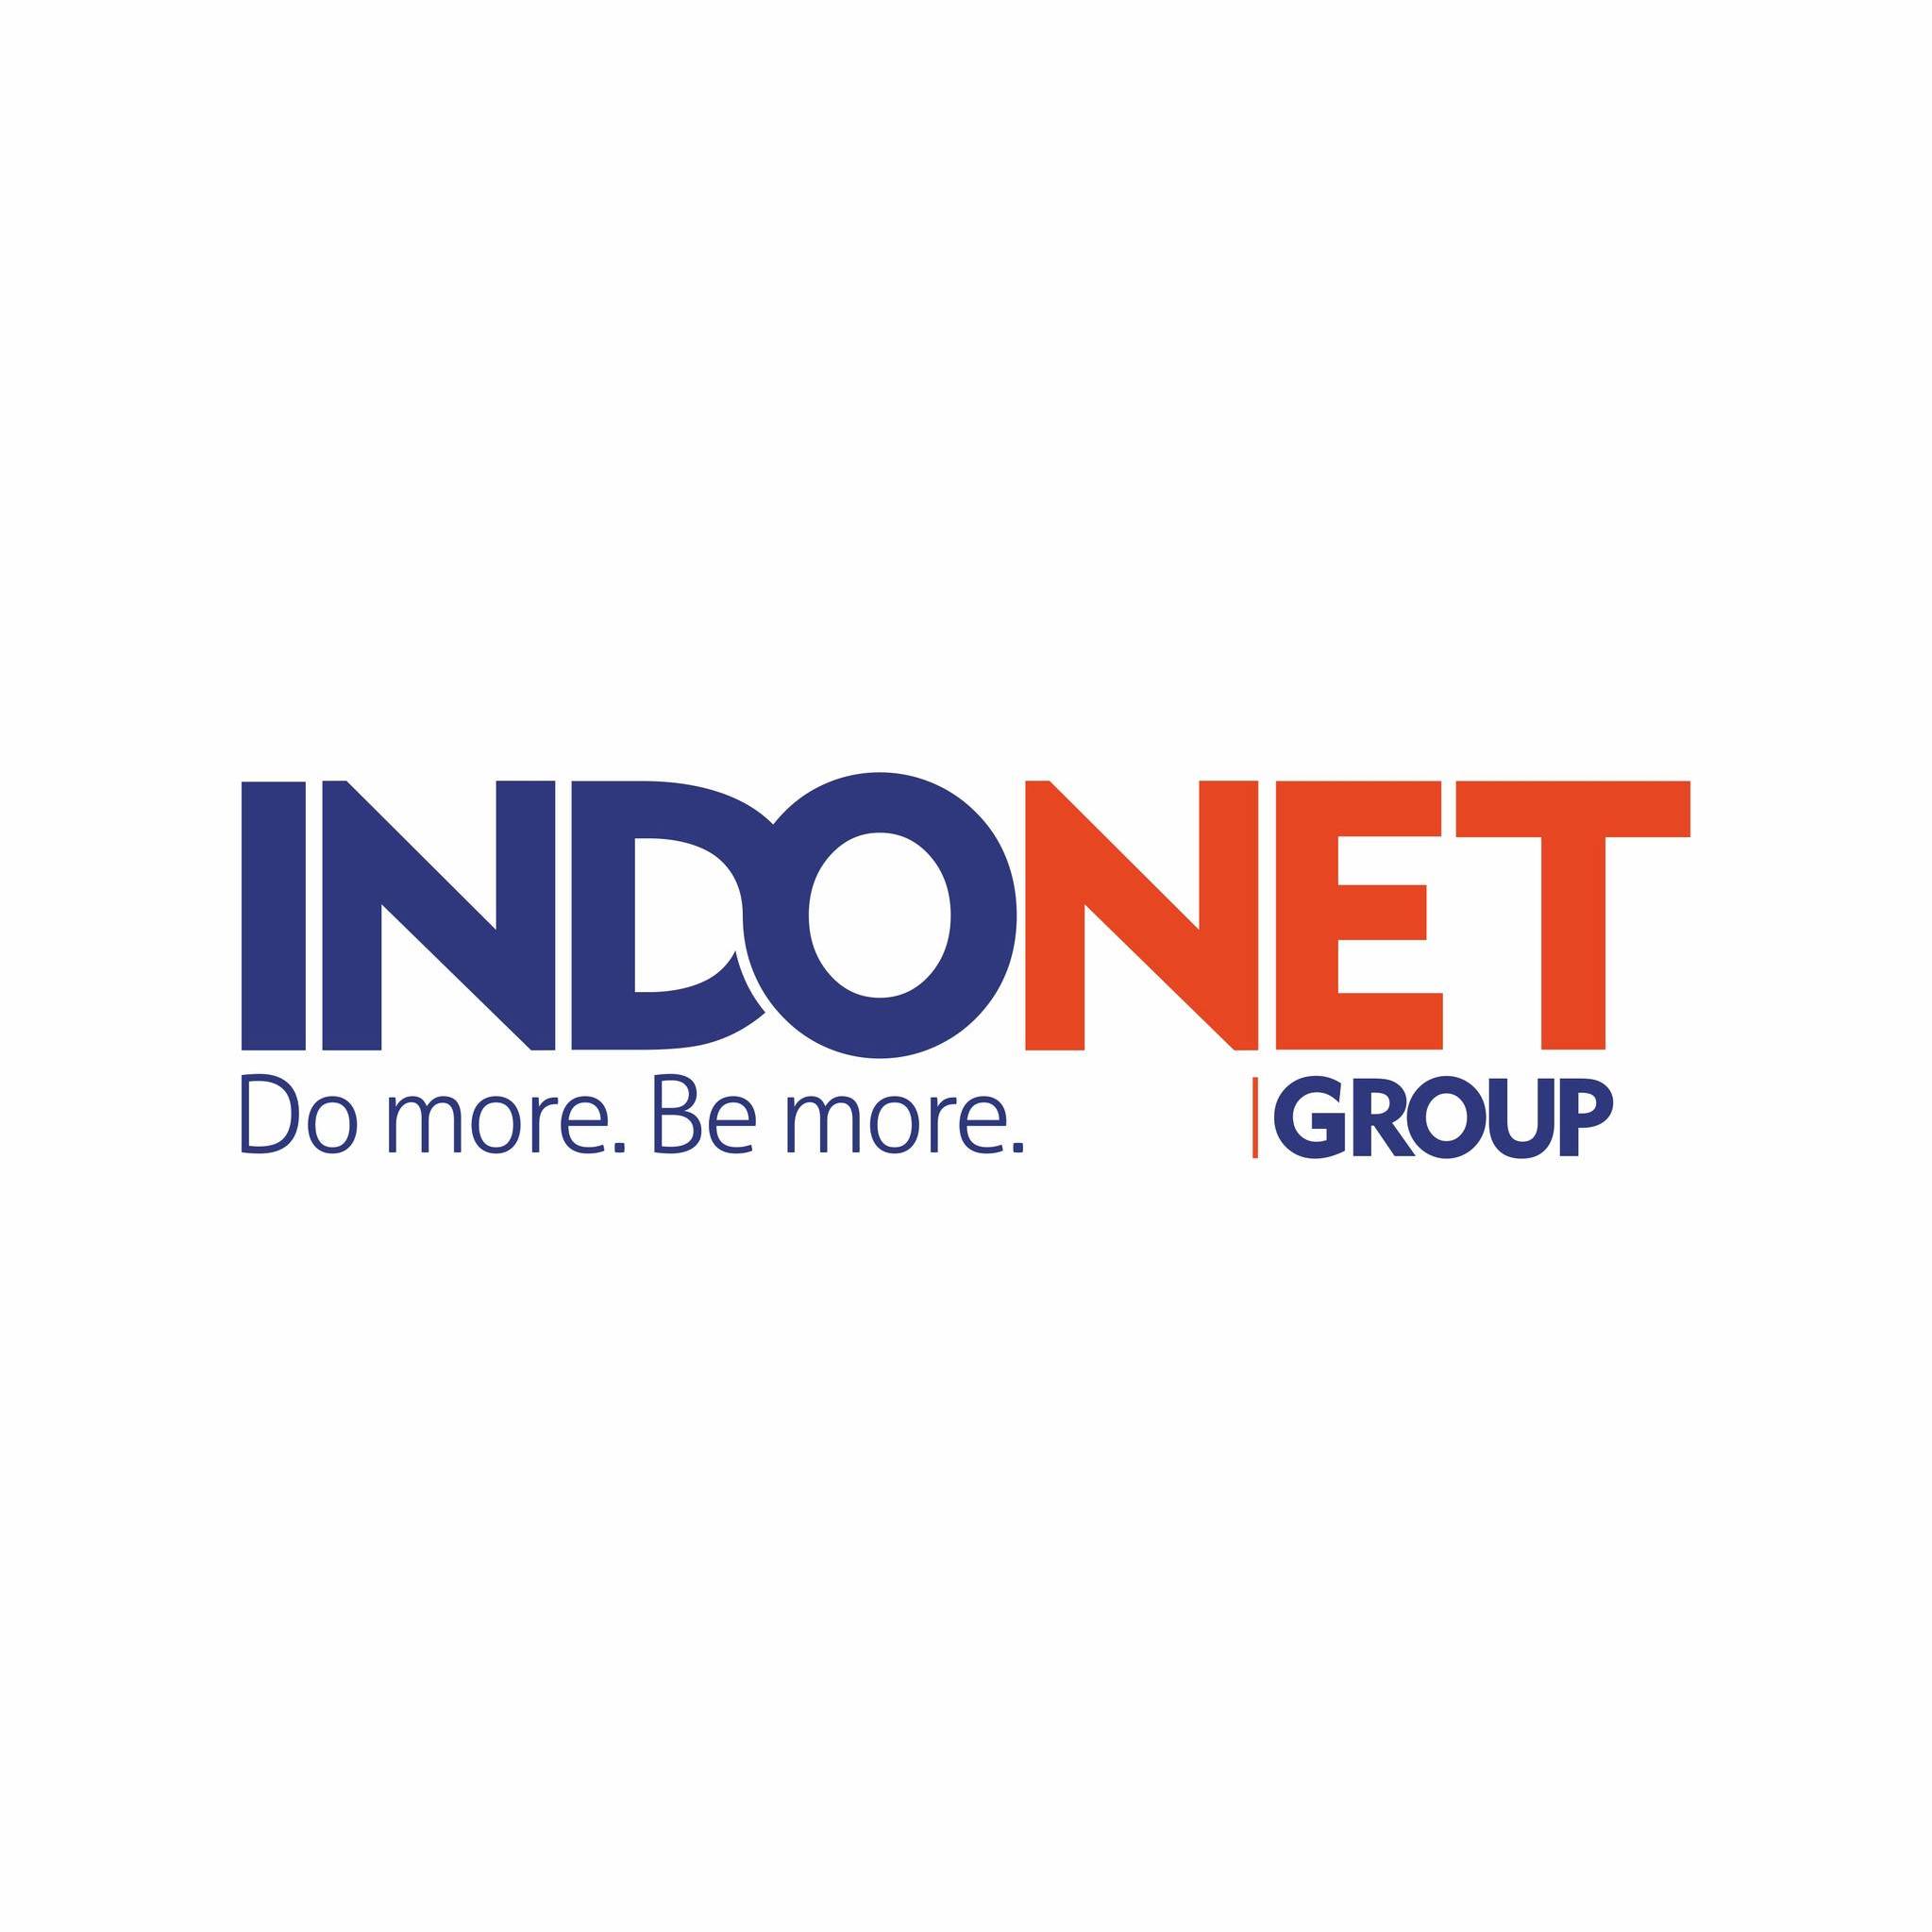  Indonet Group - Leading Manufacturers of High-Quality Plastic Netting and Films